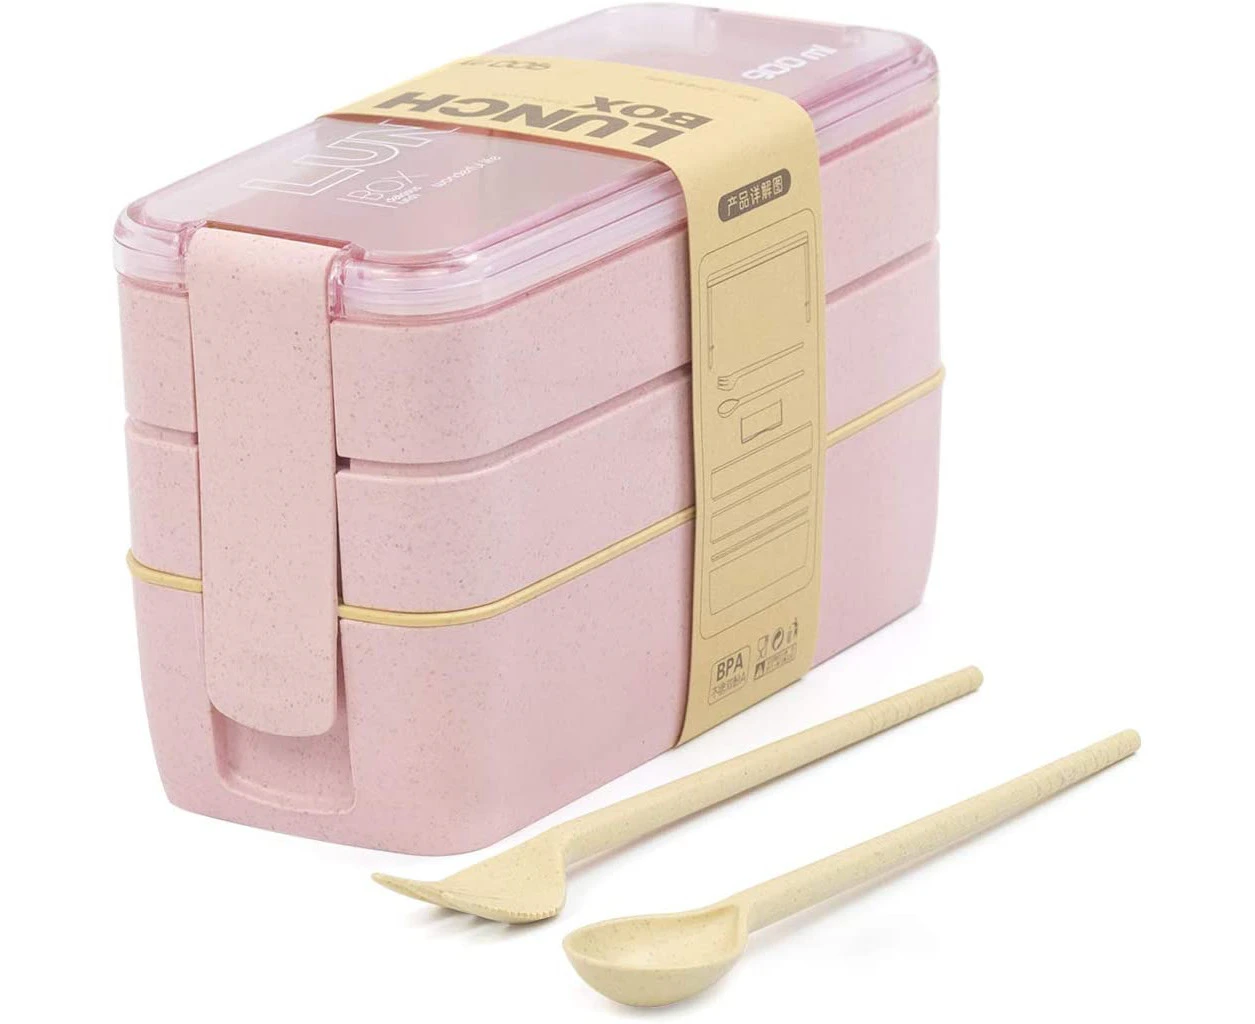 Iteryn Stackable Bento Box Lunch Box, Wheat Straw, 3-In-1 Compartment  Japanese Lunch Containers Leakproof, Eco-Friendly Bento Lunch Box Meal Prep  - 2